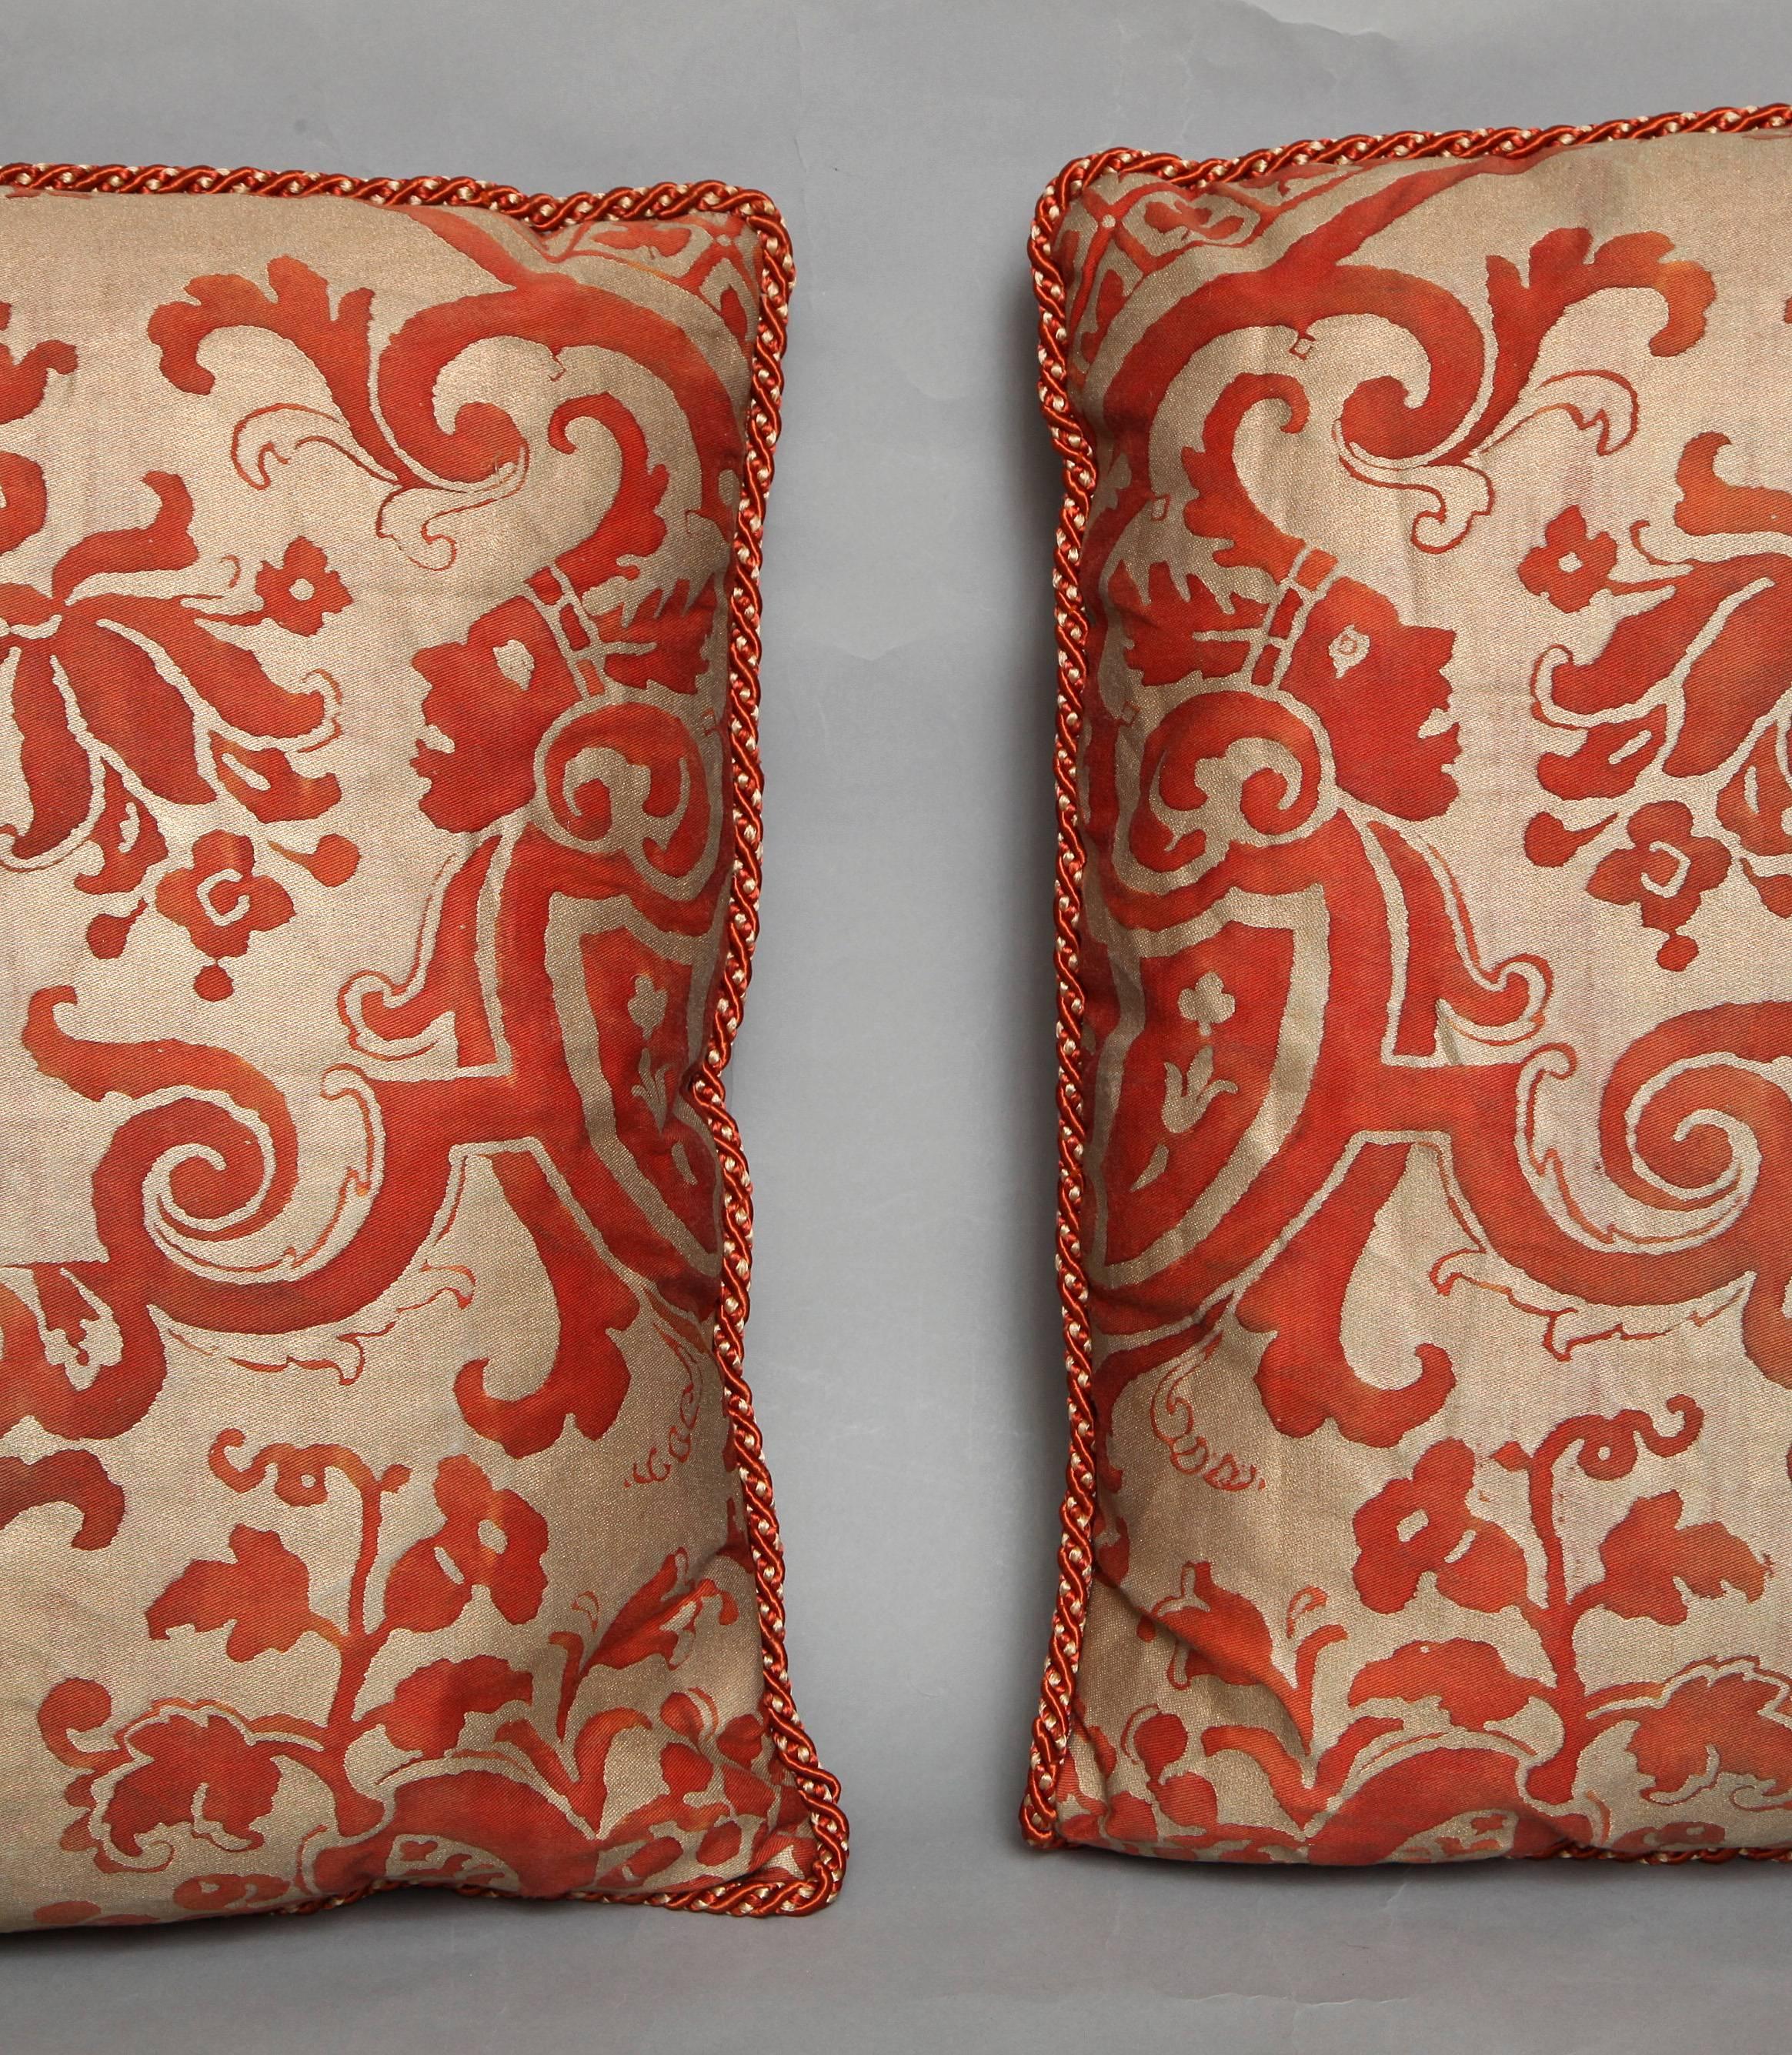 Pair of Fortuny Fabric Cushions in the Carnavalet Pattern 1